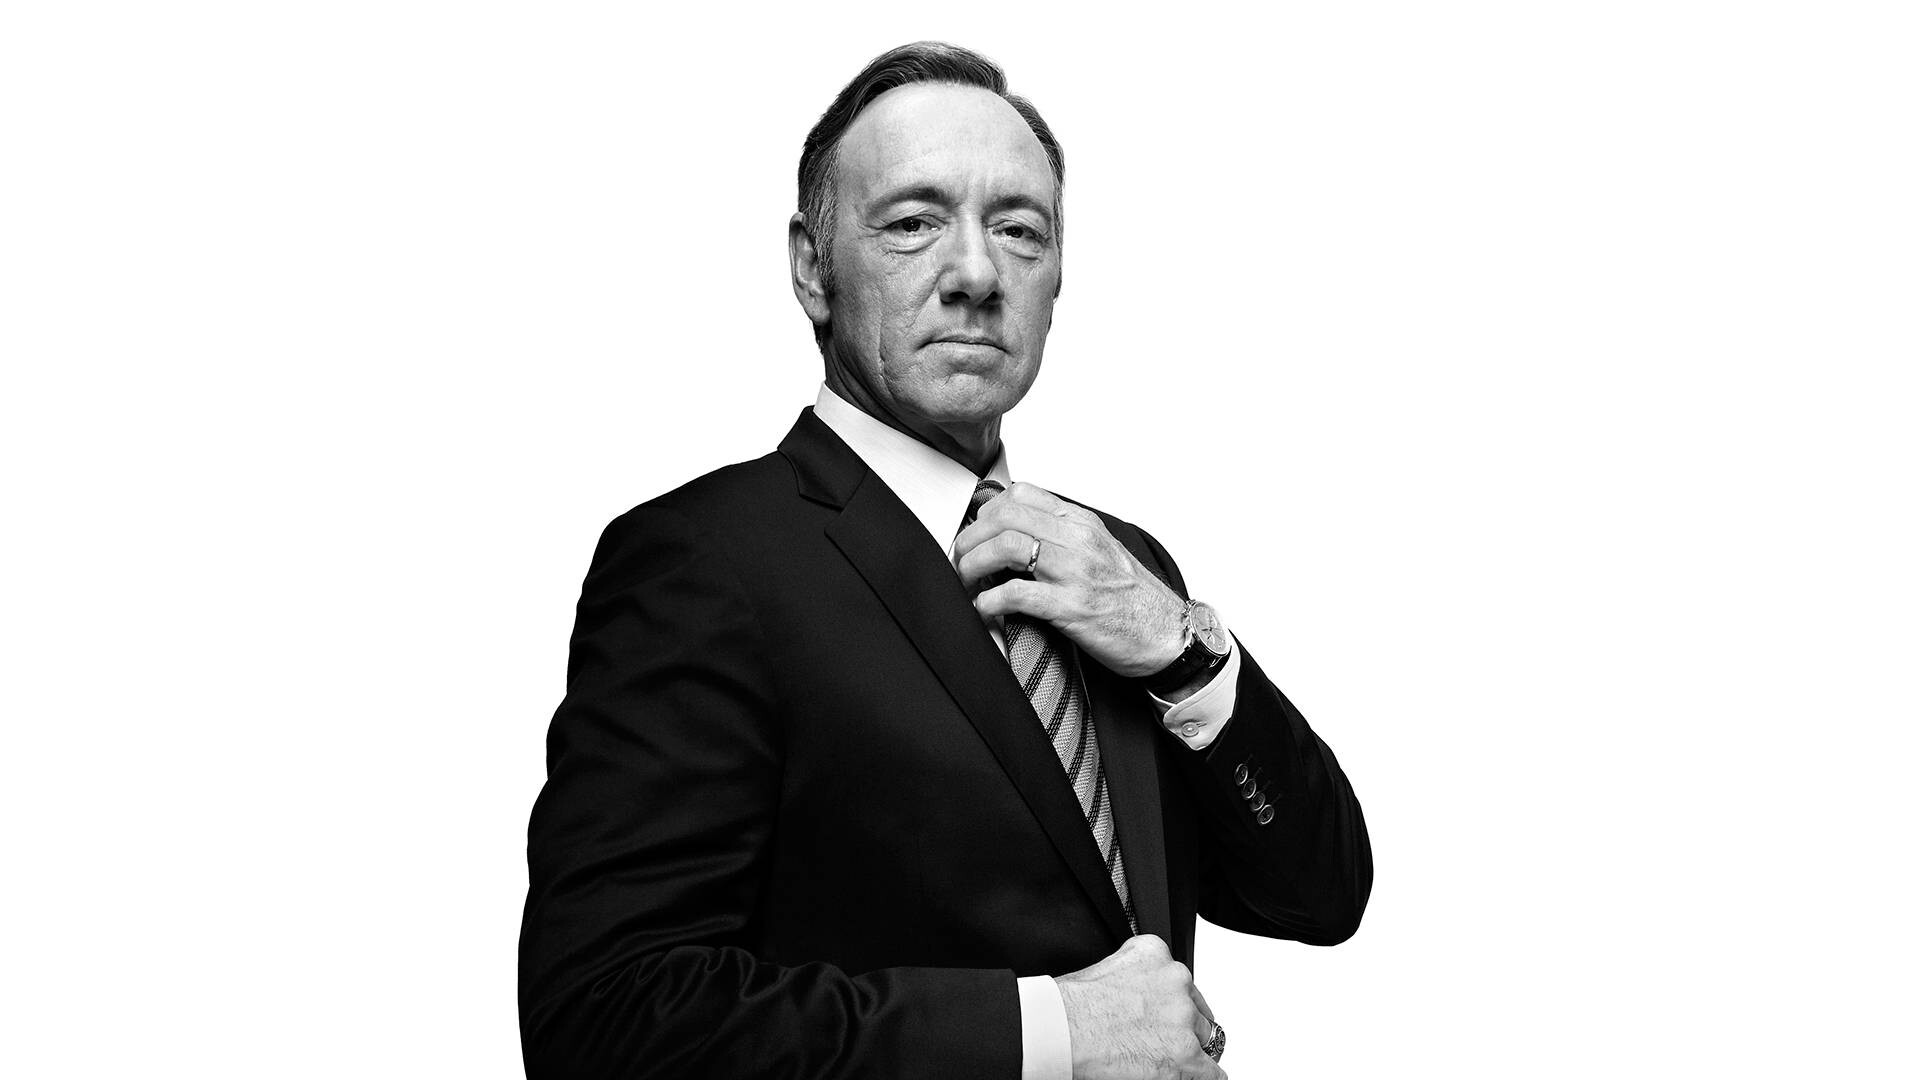 House of Cards: Frank Underwood, a power-hungry Democratic congressman from South Carolina and House majority whip. 1920x1080 Full HD Wallpaper.